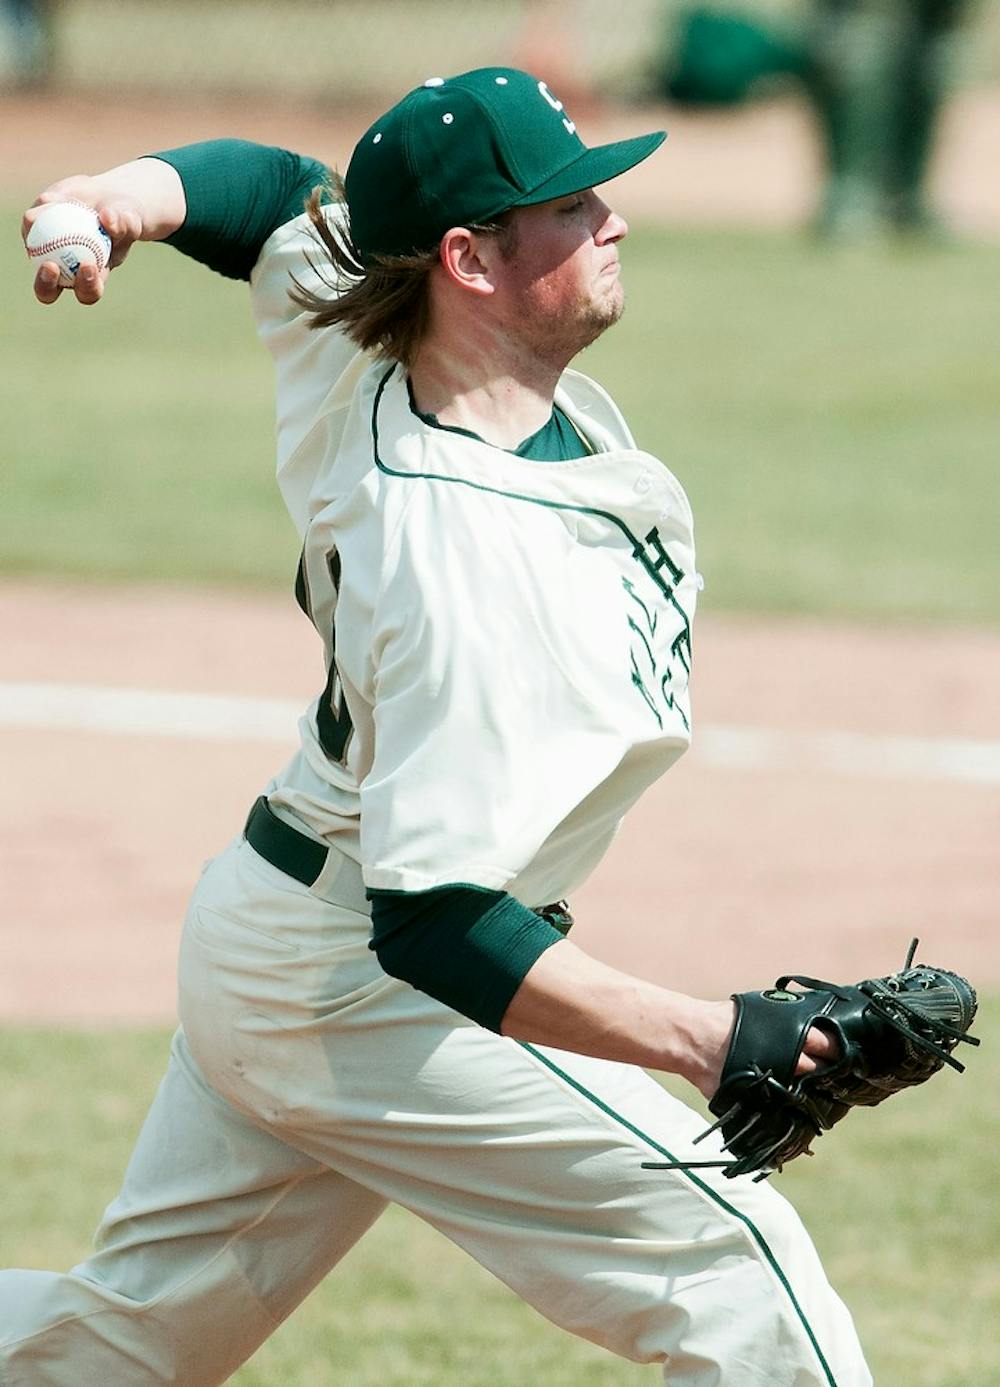 <p>Sophomore pitcher Anthony Misiewicz throws out a pitch during the game against Siena on April 6, 2014, at McLane Baseball Stadium at Old College Field. The Spartans defeated the Saints, 5-1. Danyelle Morrow/The State News</p>